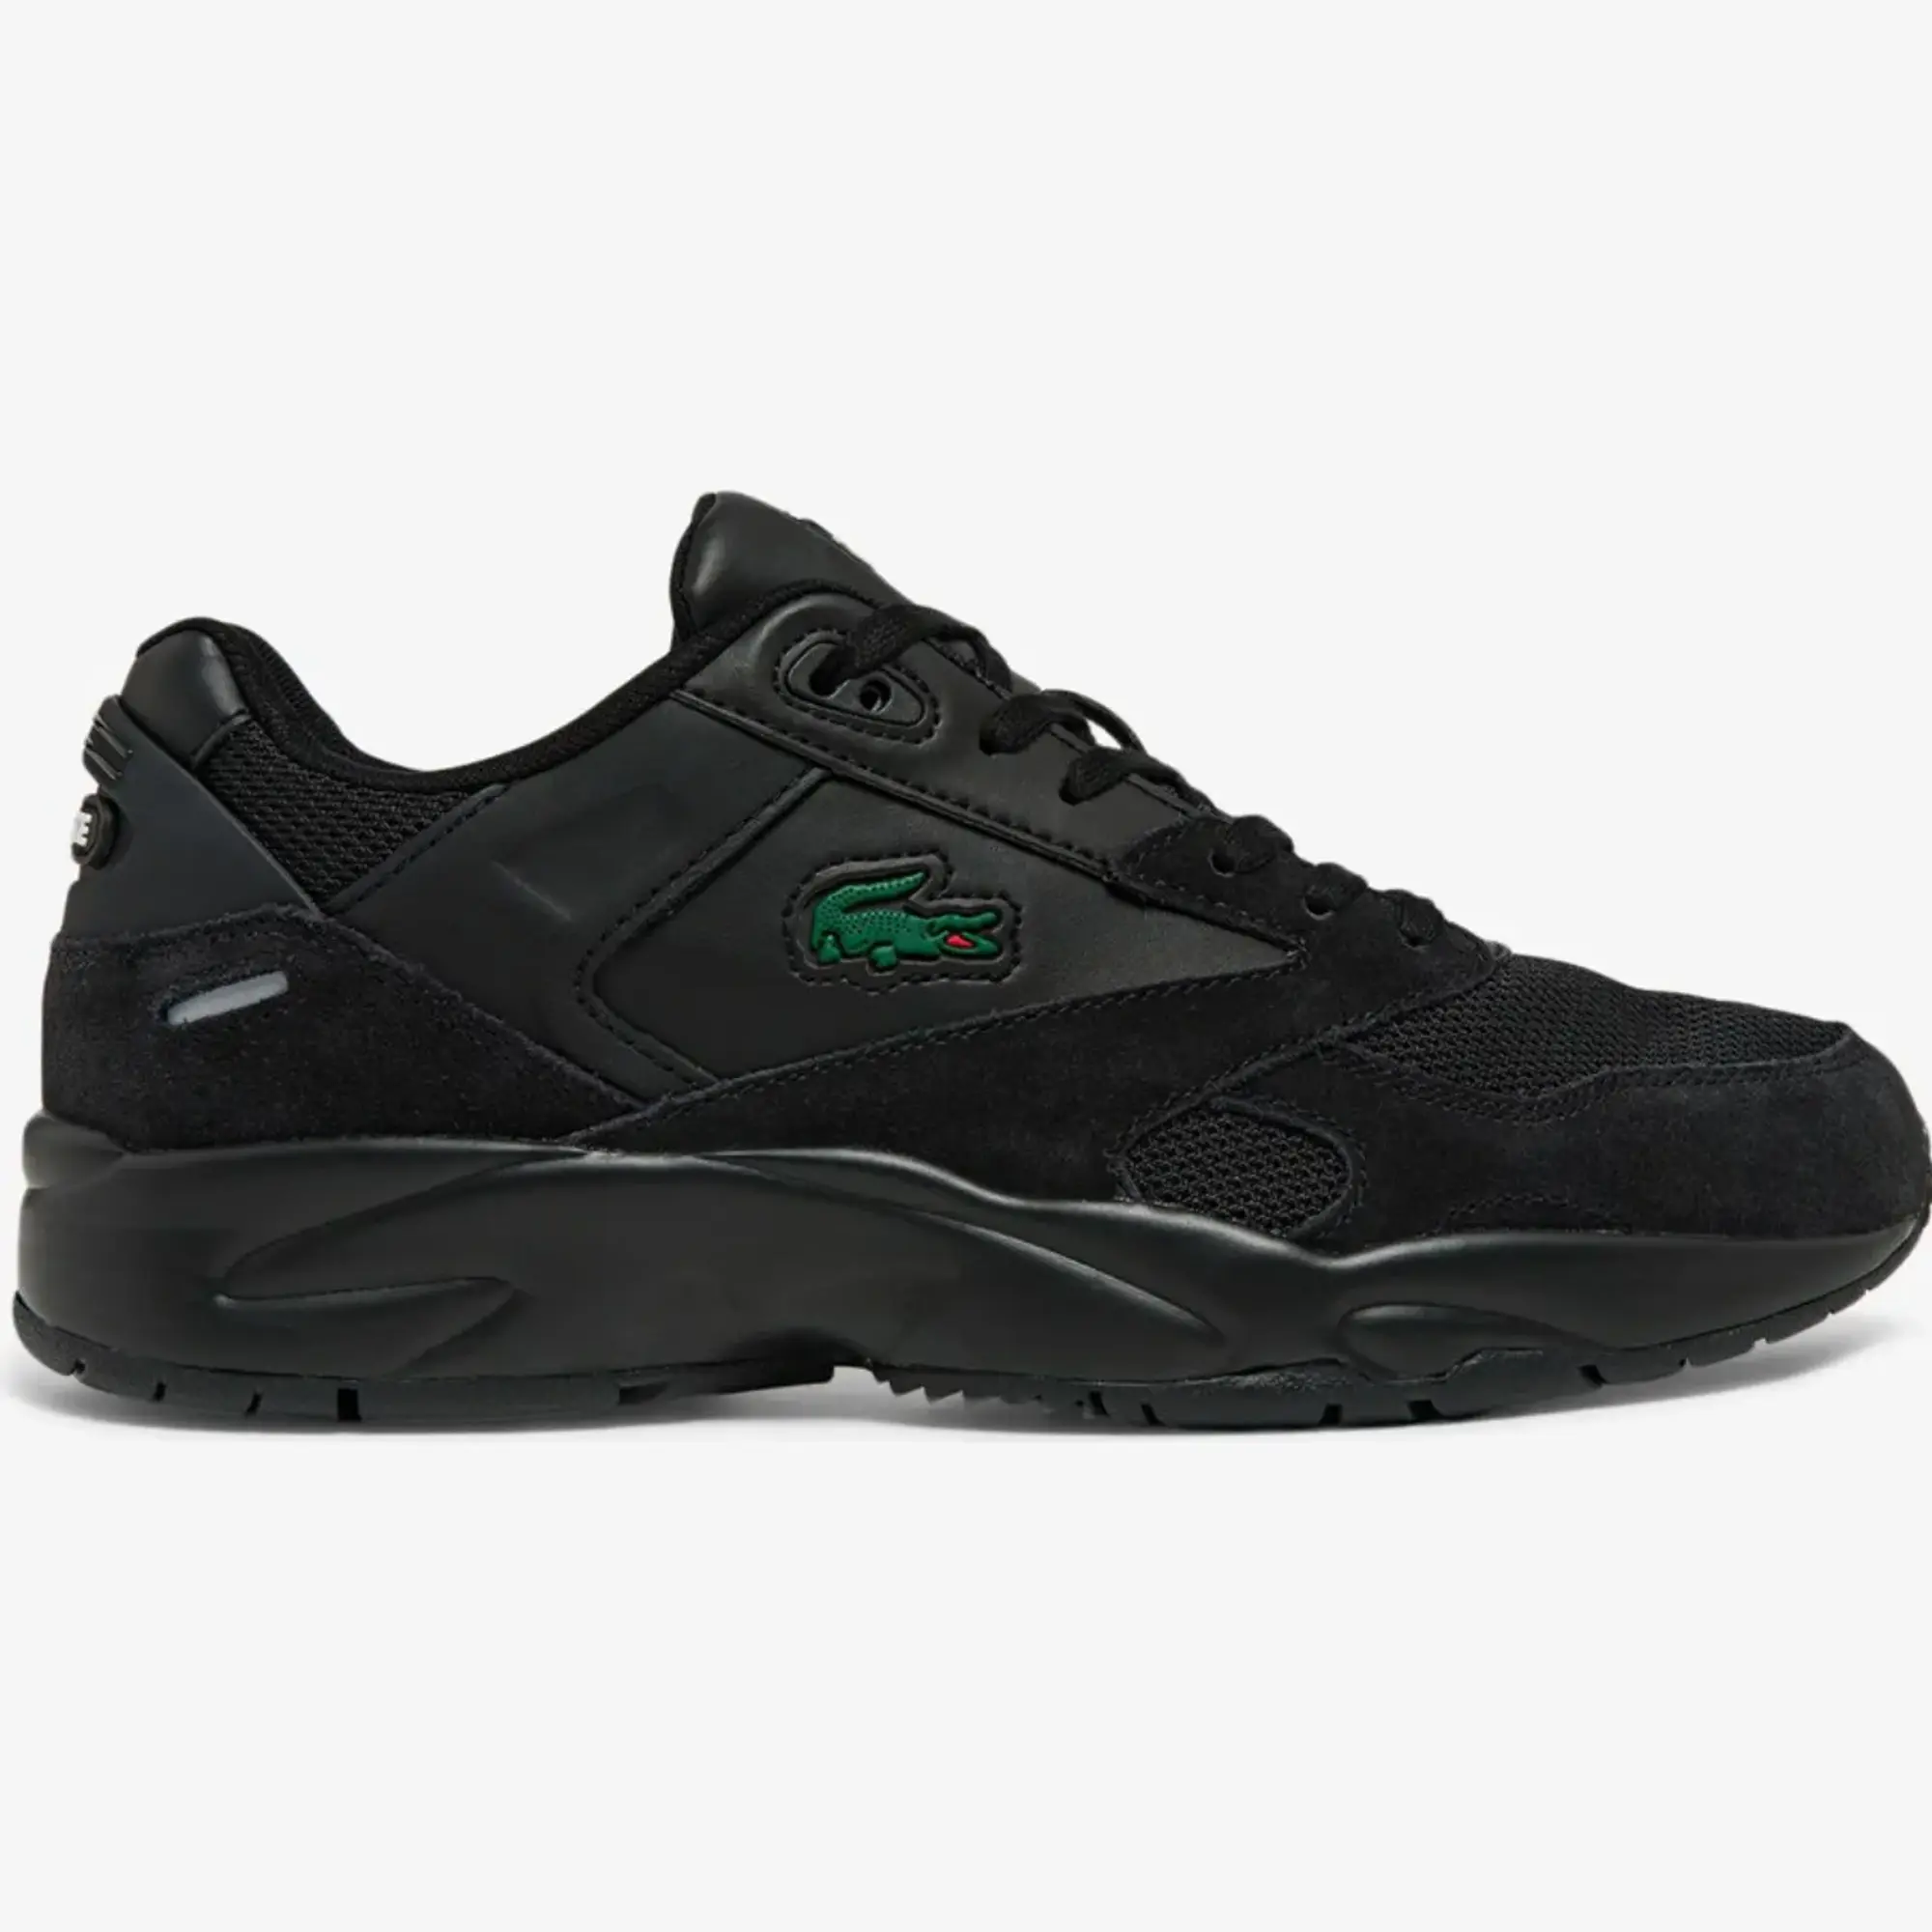 Lacoste Men's Storm 96 LO Mesh and Leather Trainers - Black